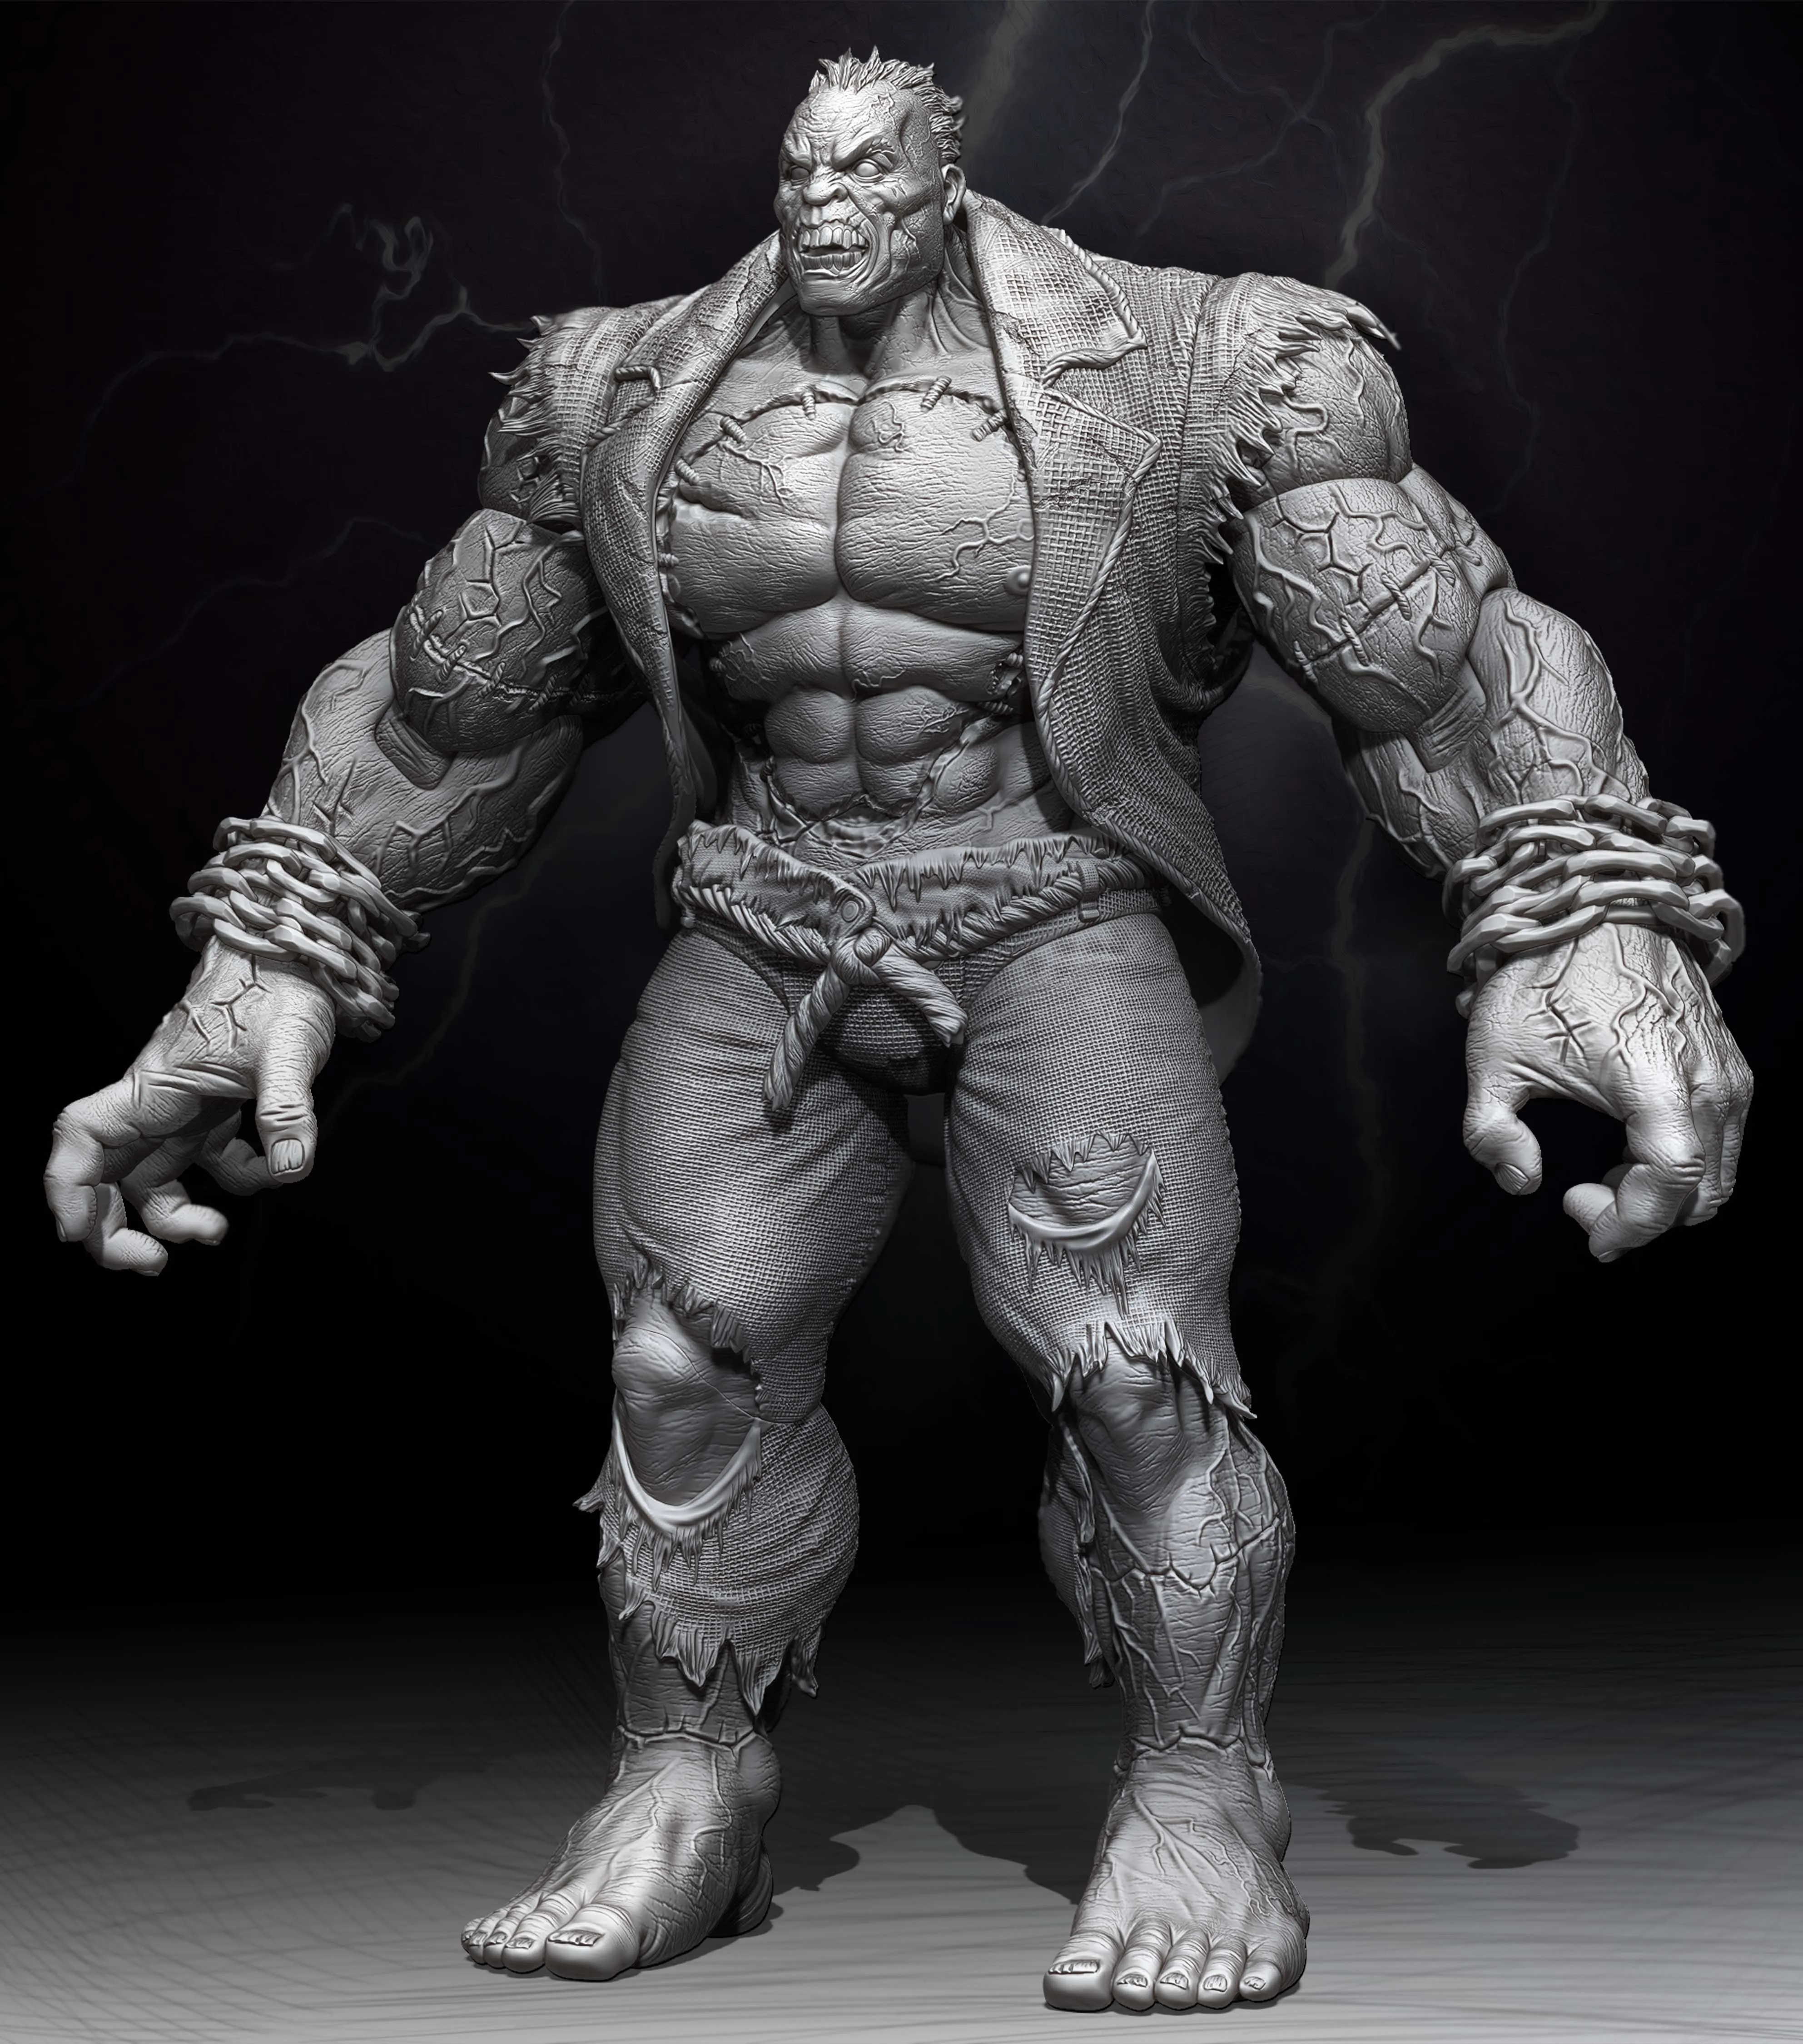 Arkham City Solomon Grundy Action Figure for DC Collectibles. Copyright DC Entertainment and used by permission.